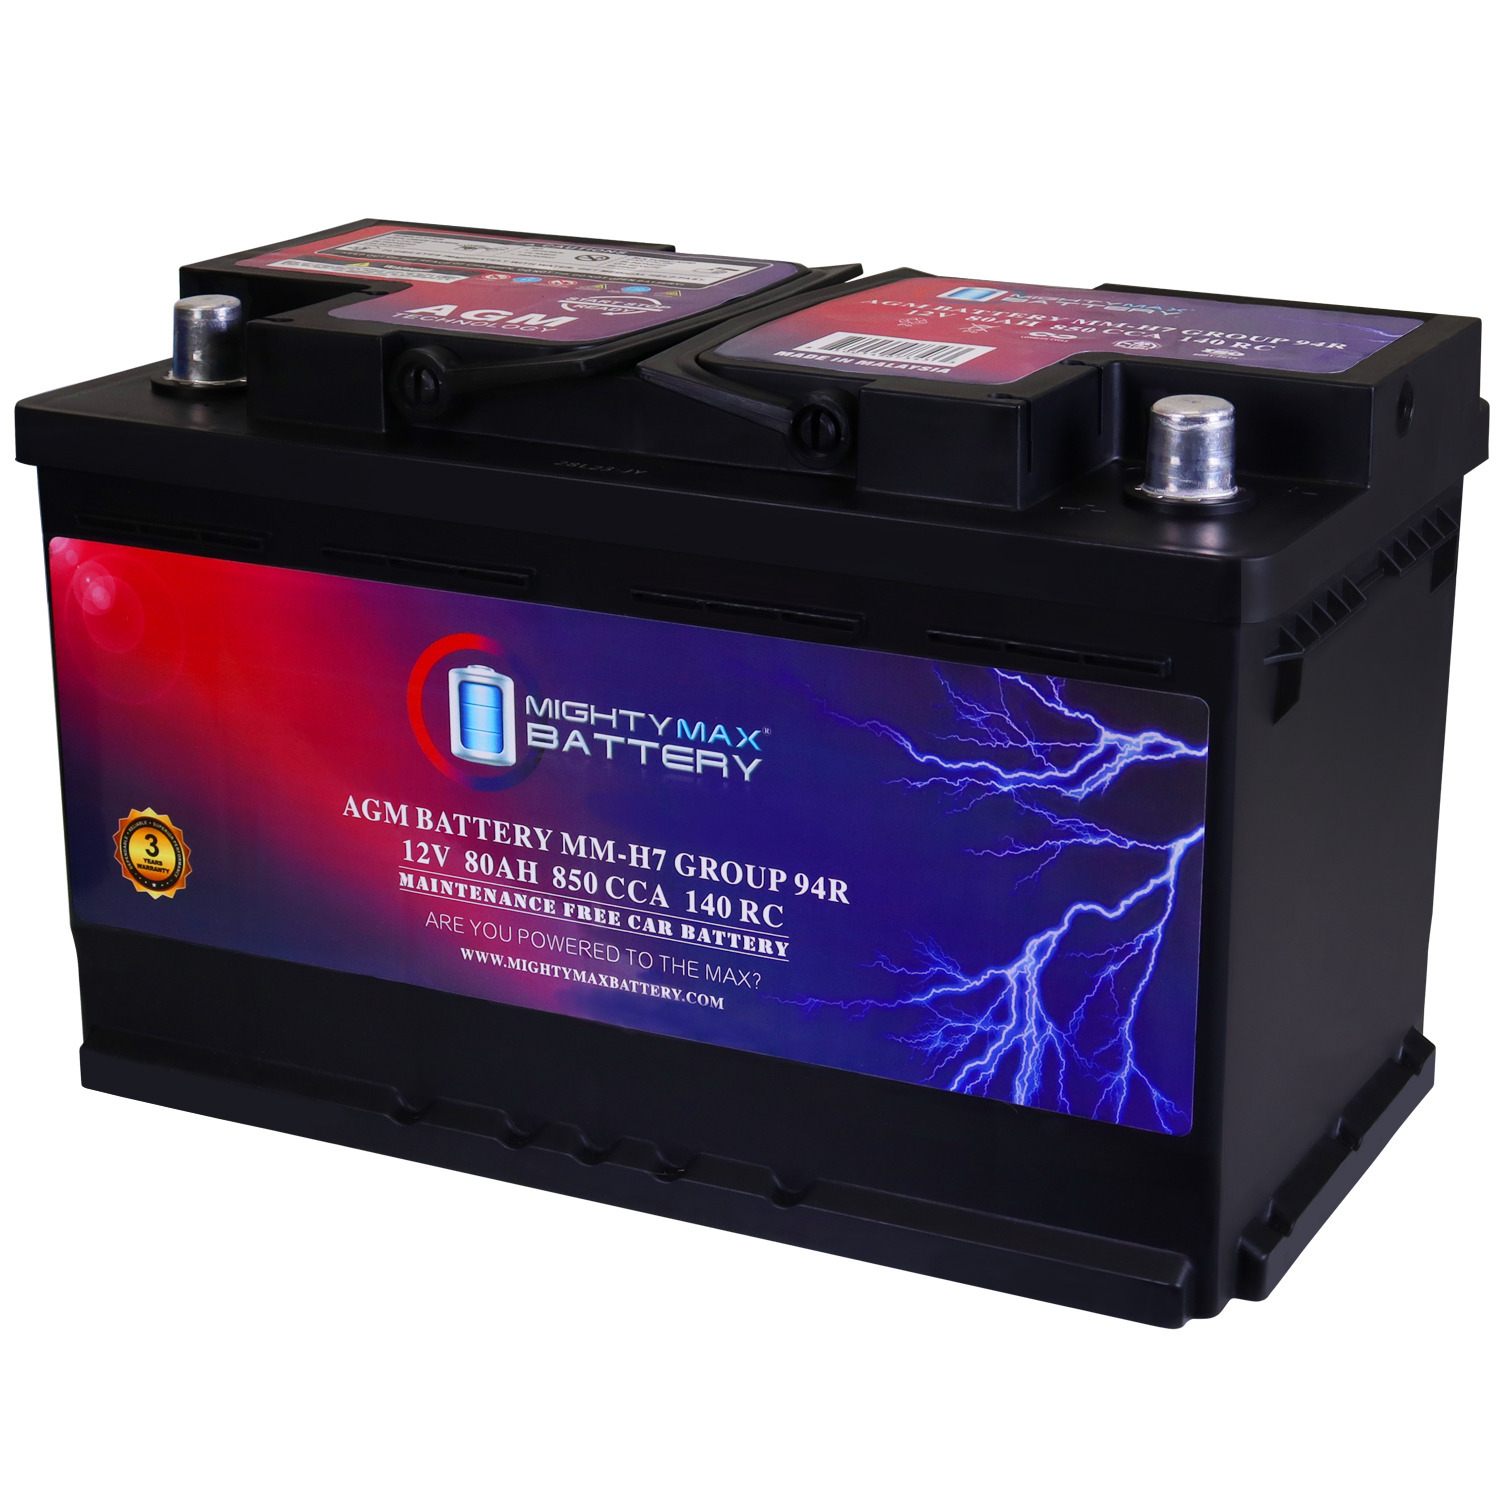 MM-H7 Group 94R 12V 80AH 140RC 850 CCA Replacement Battery Compatible with BMW 528xi 08